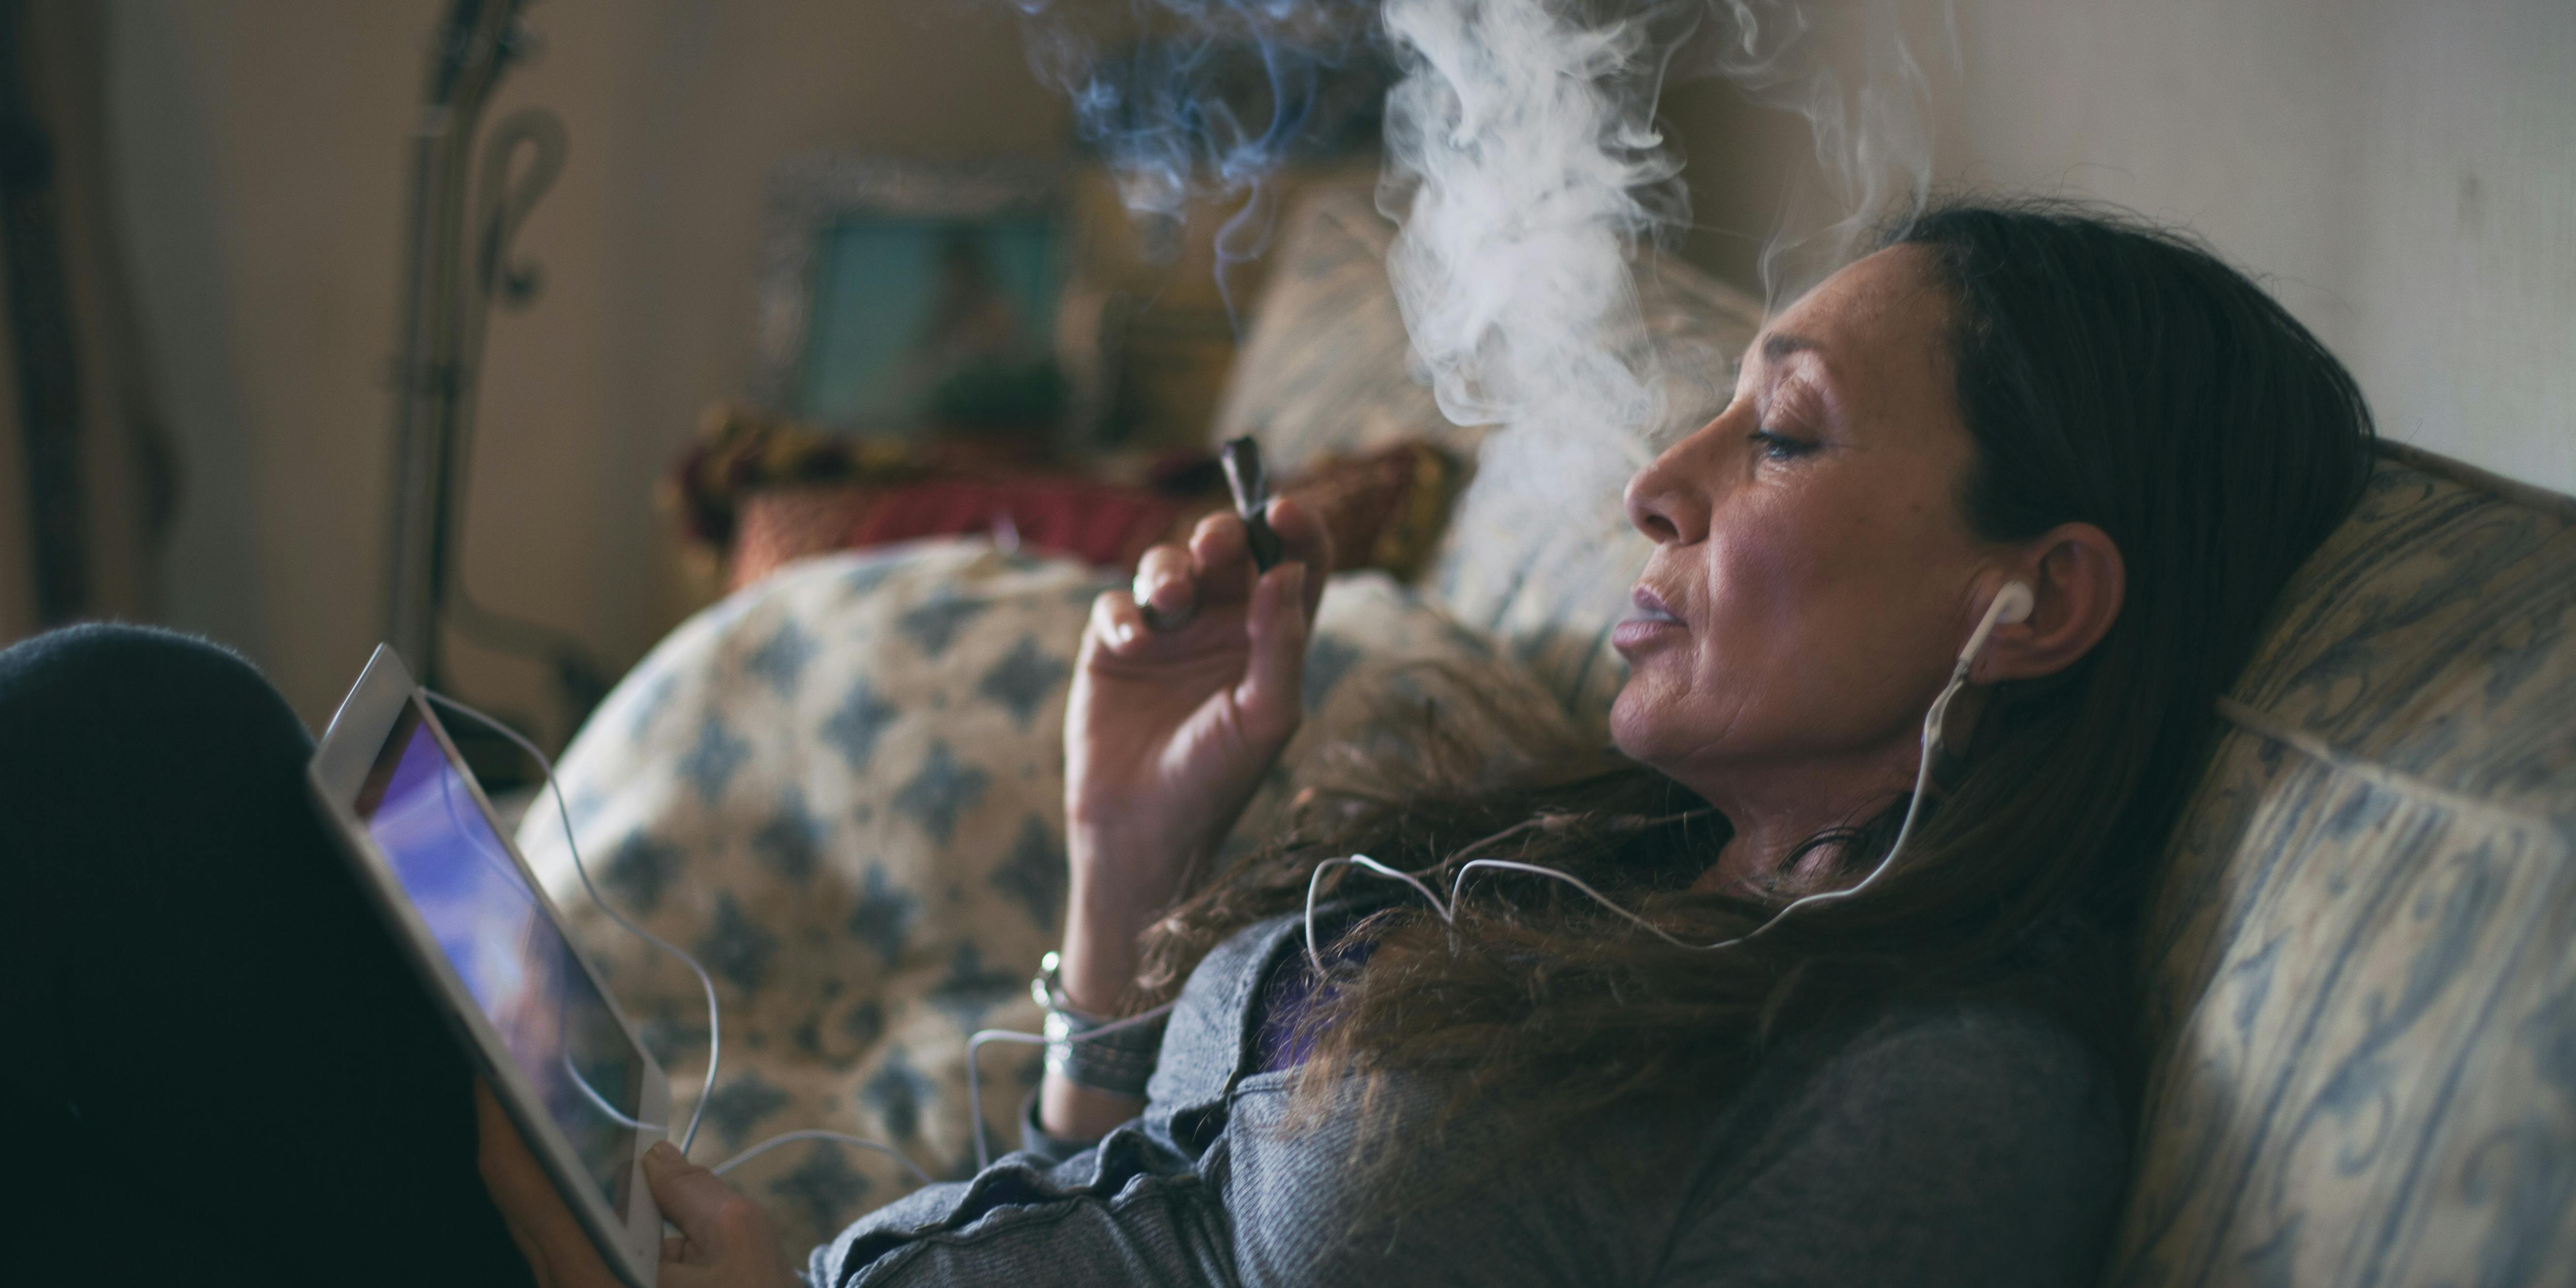 Woman relaxing on a couch, smoking a cigar and watching a video on a tablet. These are essentials for parents who smoke weed.